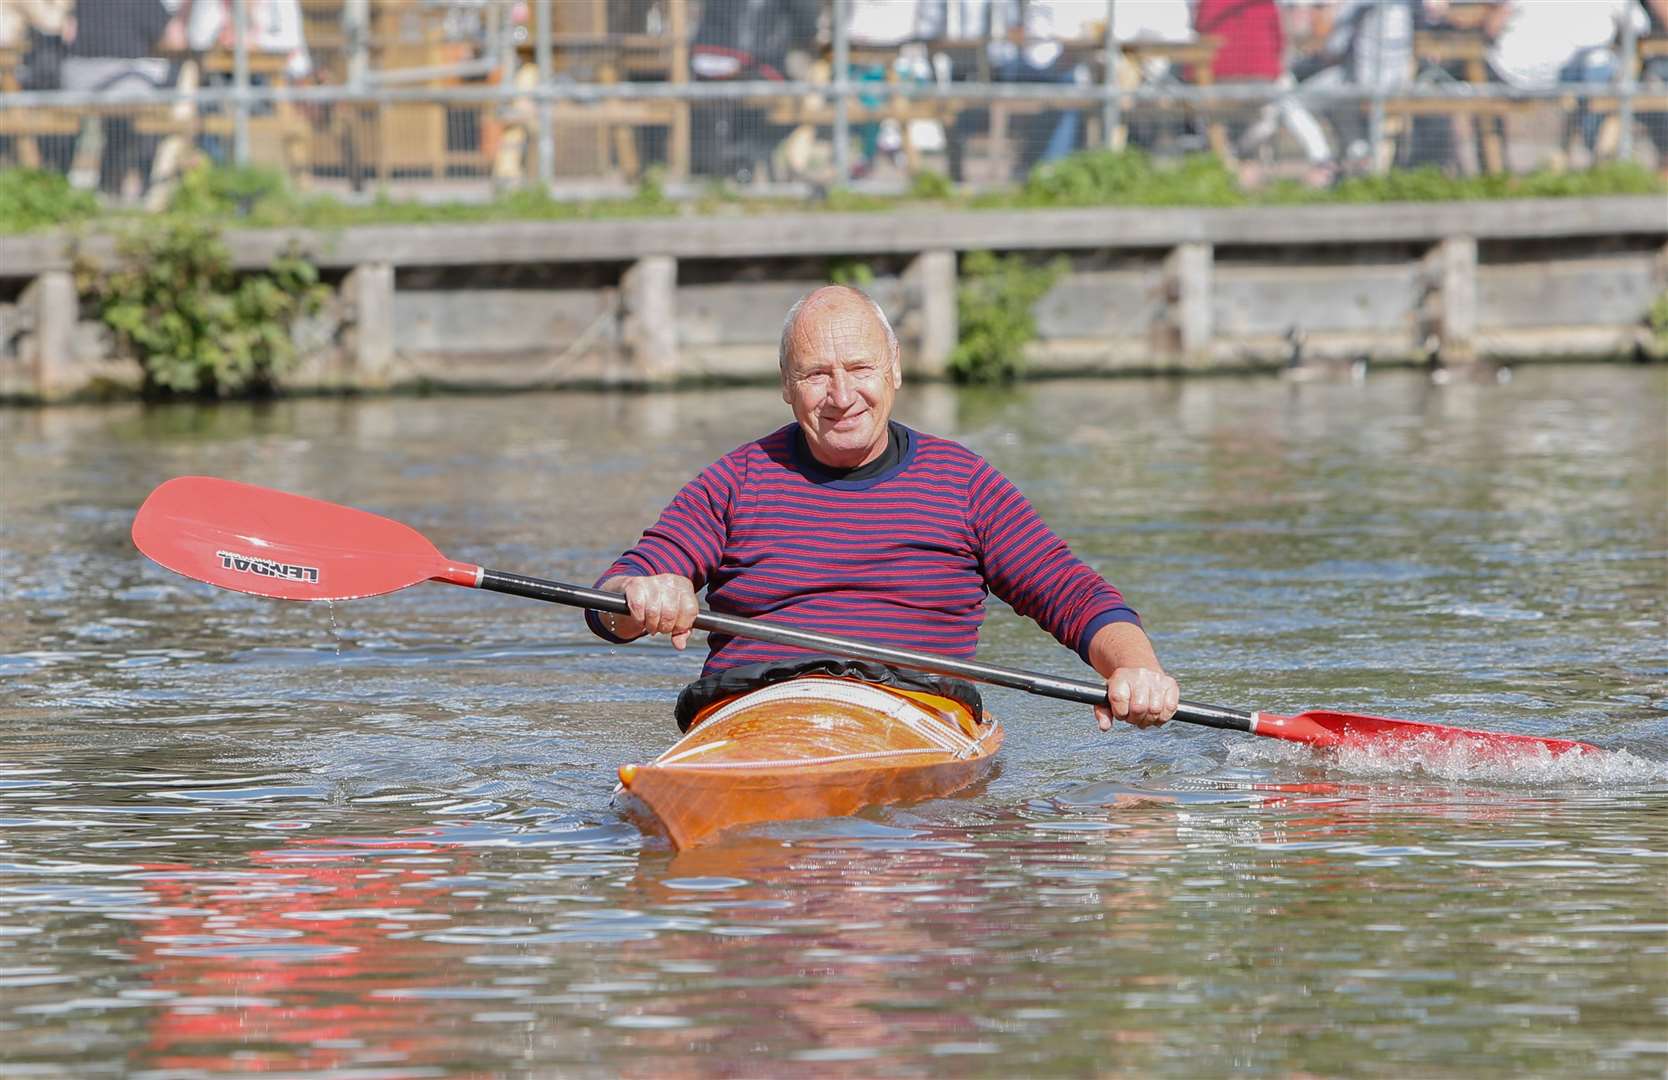 Geoff reunited with his original Nimrod kayak, and back on the Medway in 2015